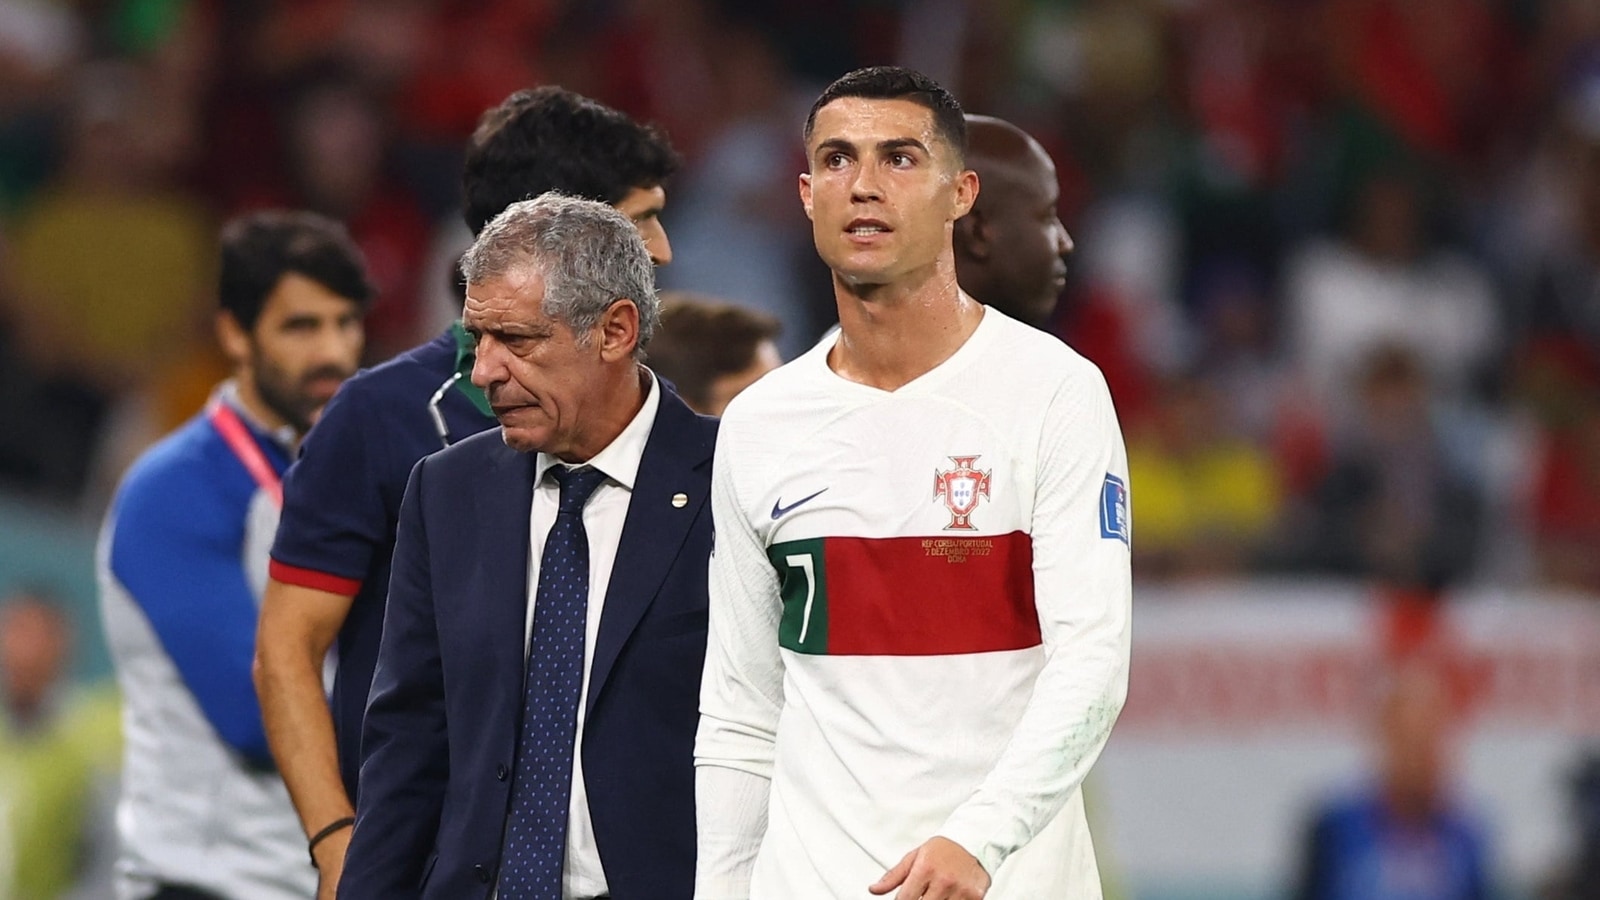 Cristiano Ronaldo may lose Portugal captaincy for FIFA World Cup Round of 16 tie Football News